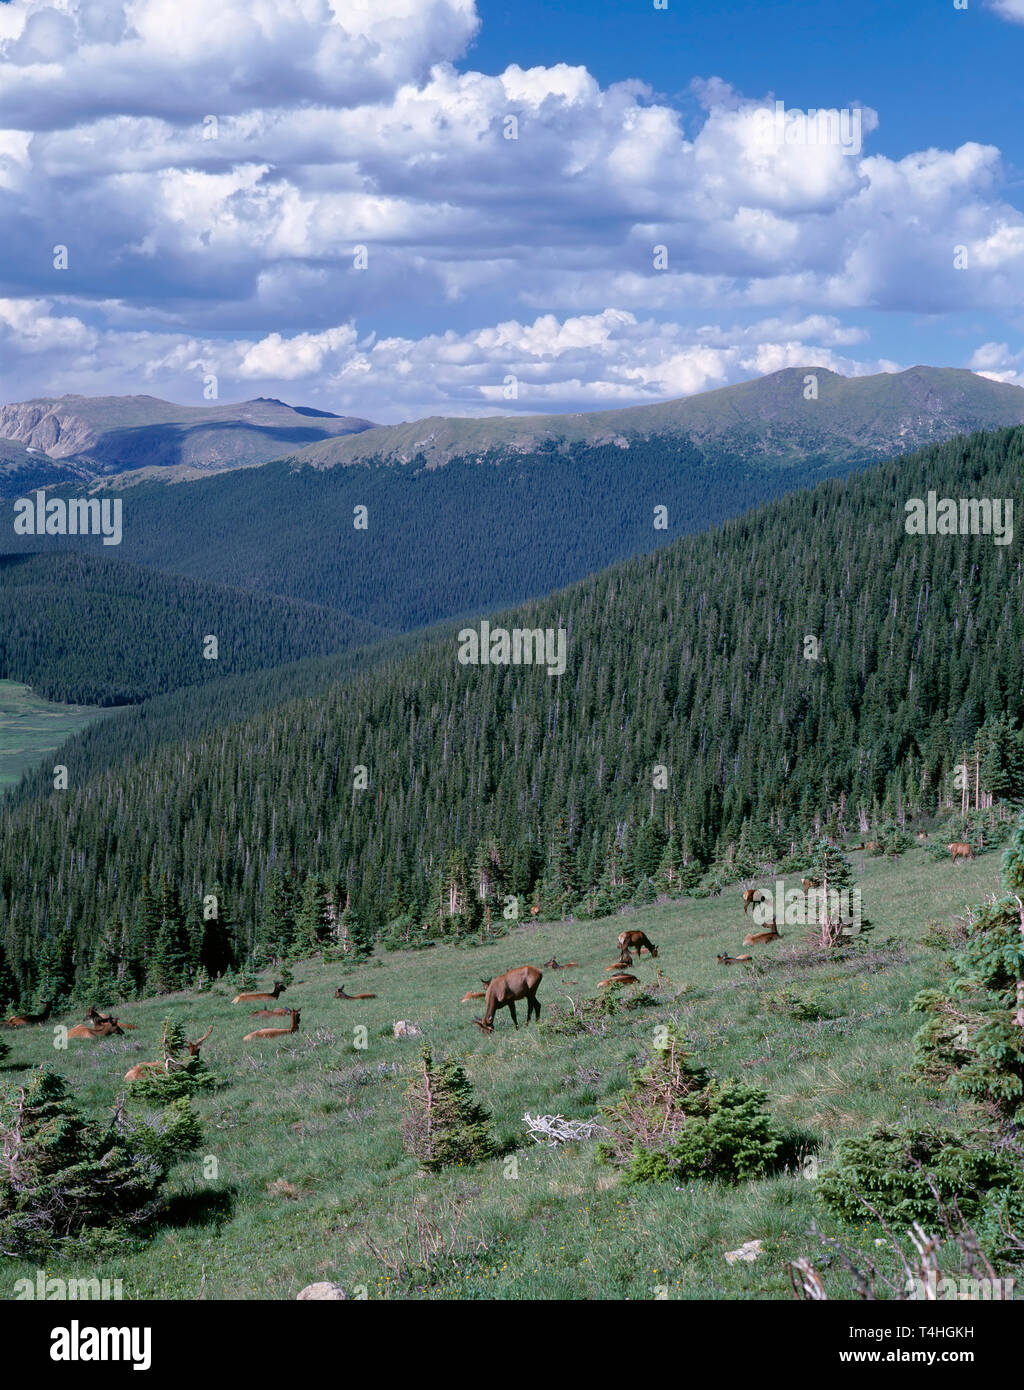 USA, Colorado, Rocky Mountain National Park, Herd of Rocky Mountain Elk in meadow, headwaters of the Colorado River are in the lower distance. Stock Photo